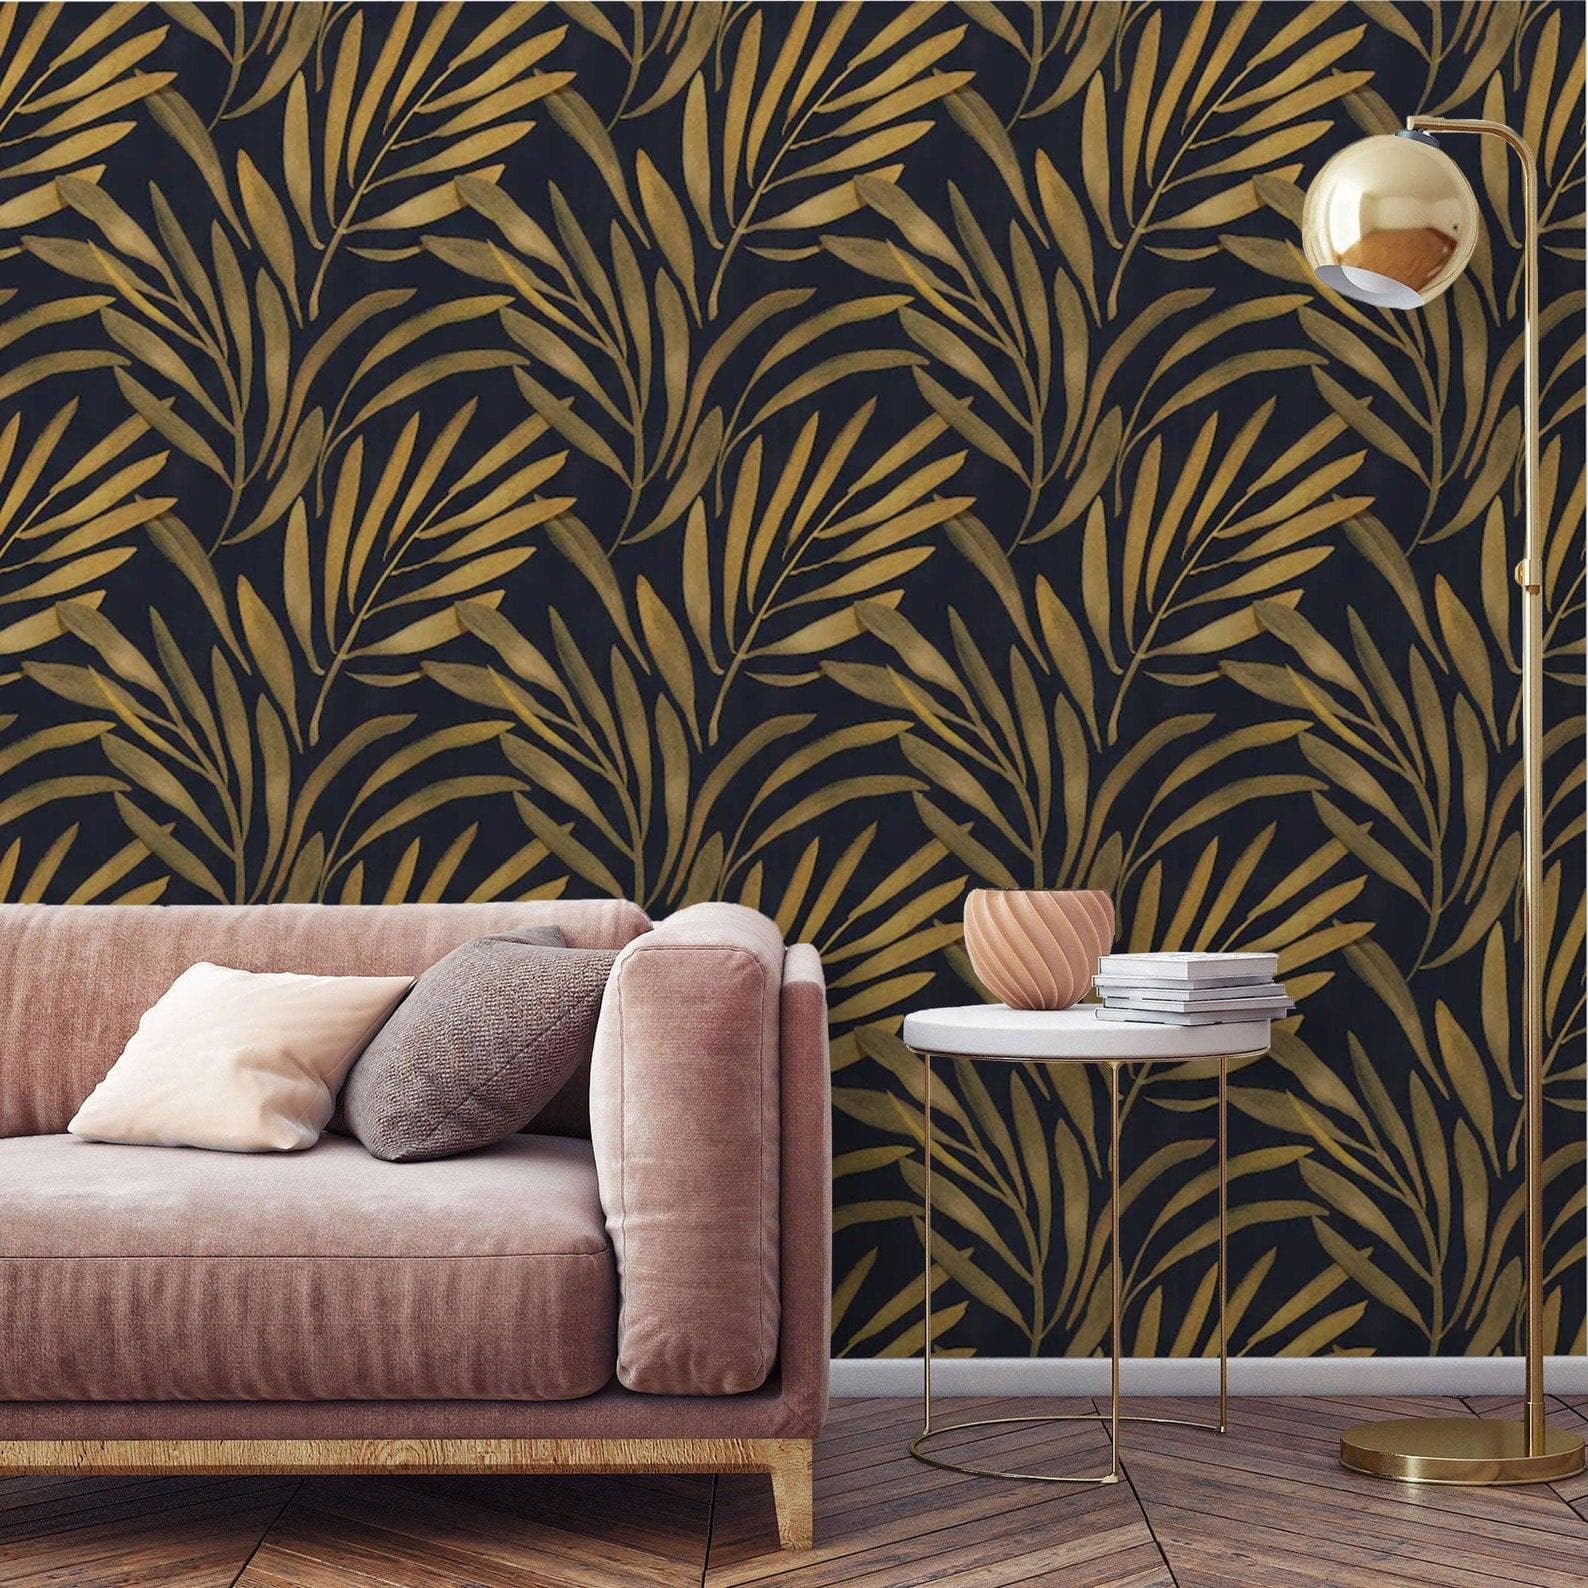 Black and Golden Tropical Leaves Wallpaper - MAIA HOMES